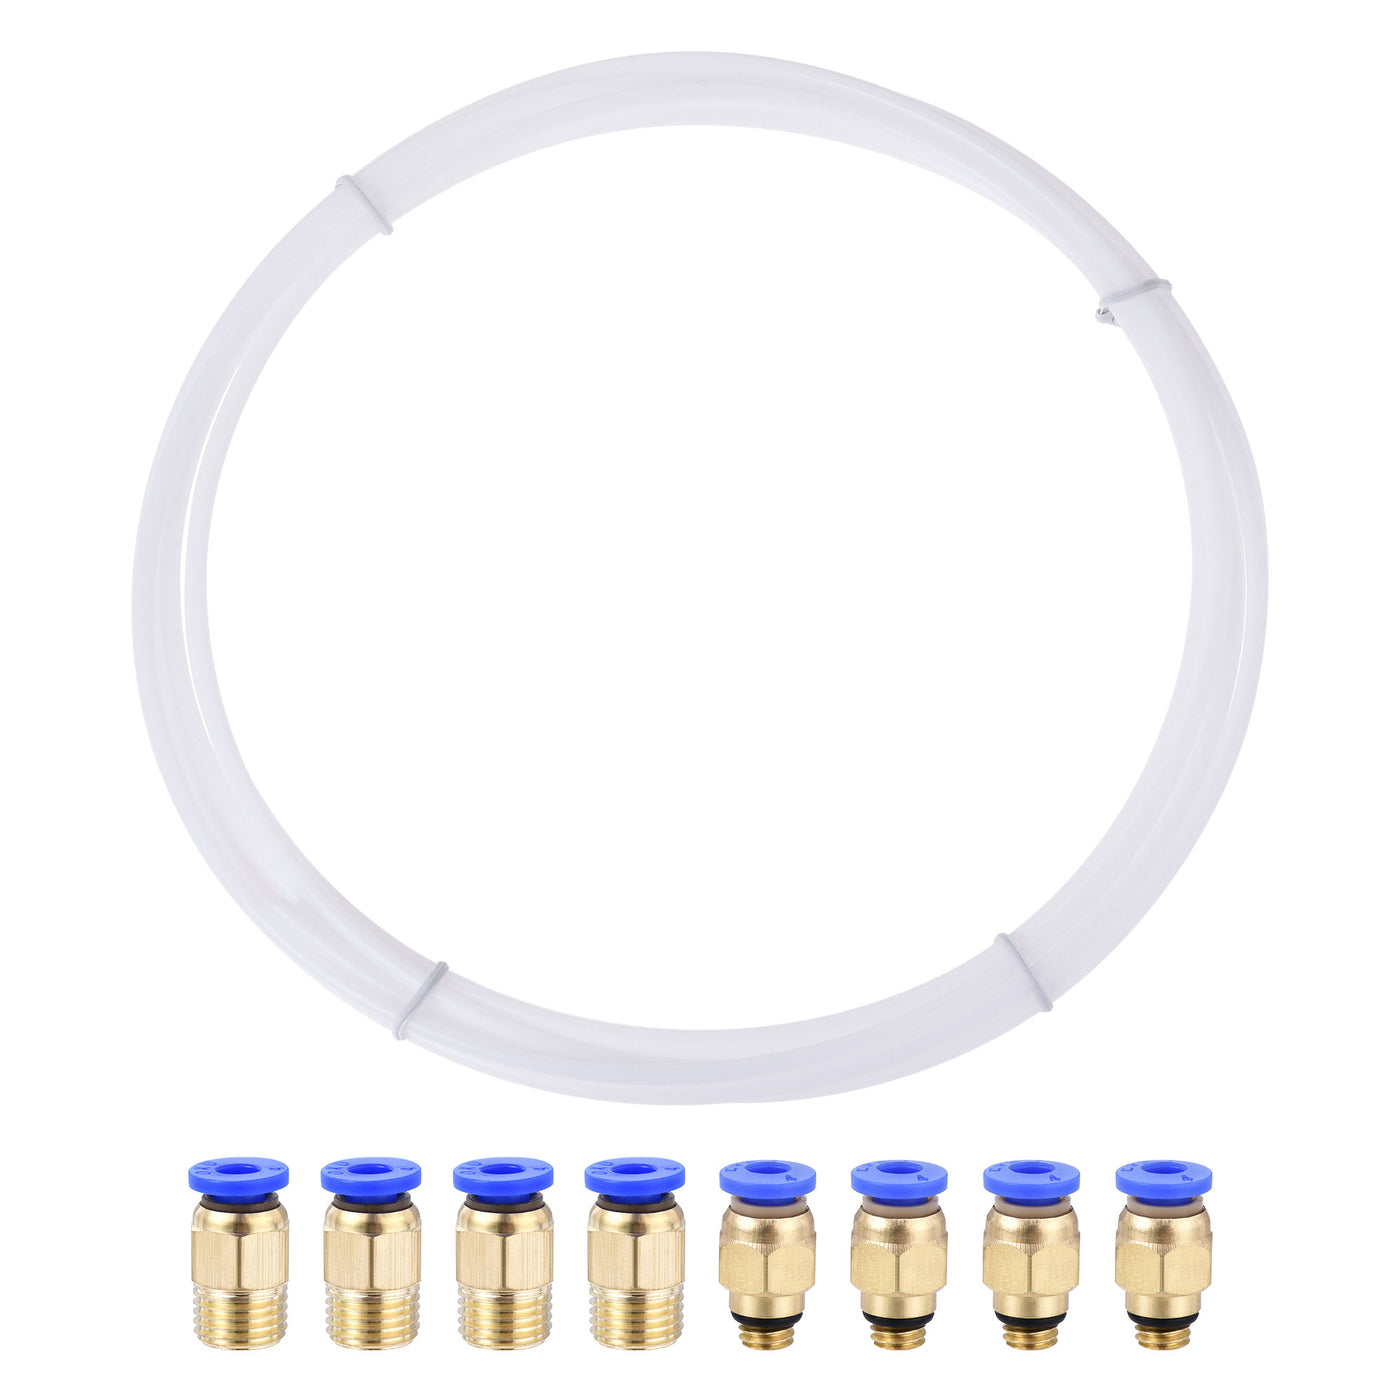 uxcell Uxcell Pneumatic PTFE Air Tubing Kit Hose Air Line Tubing 4mm OD 4M White with M6 M10 Push to Connect Fittings